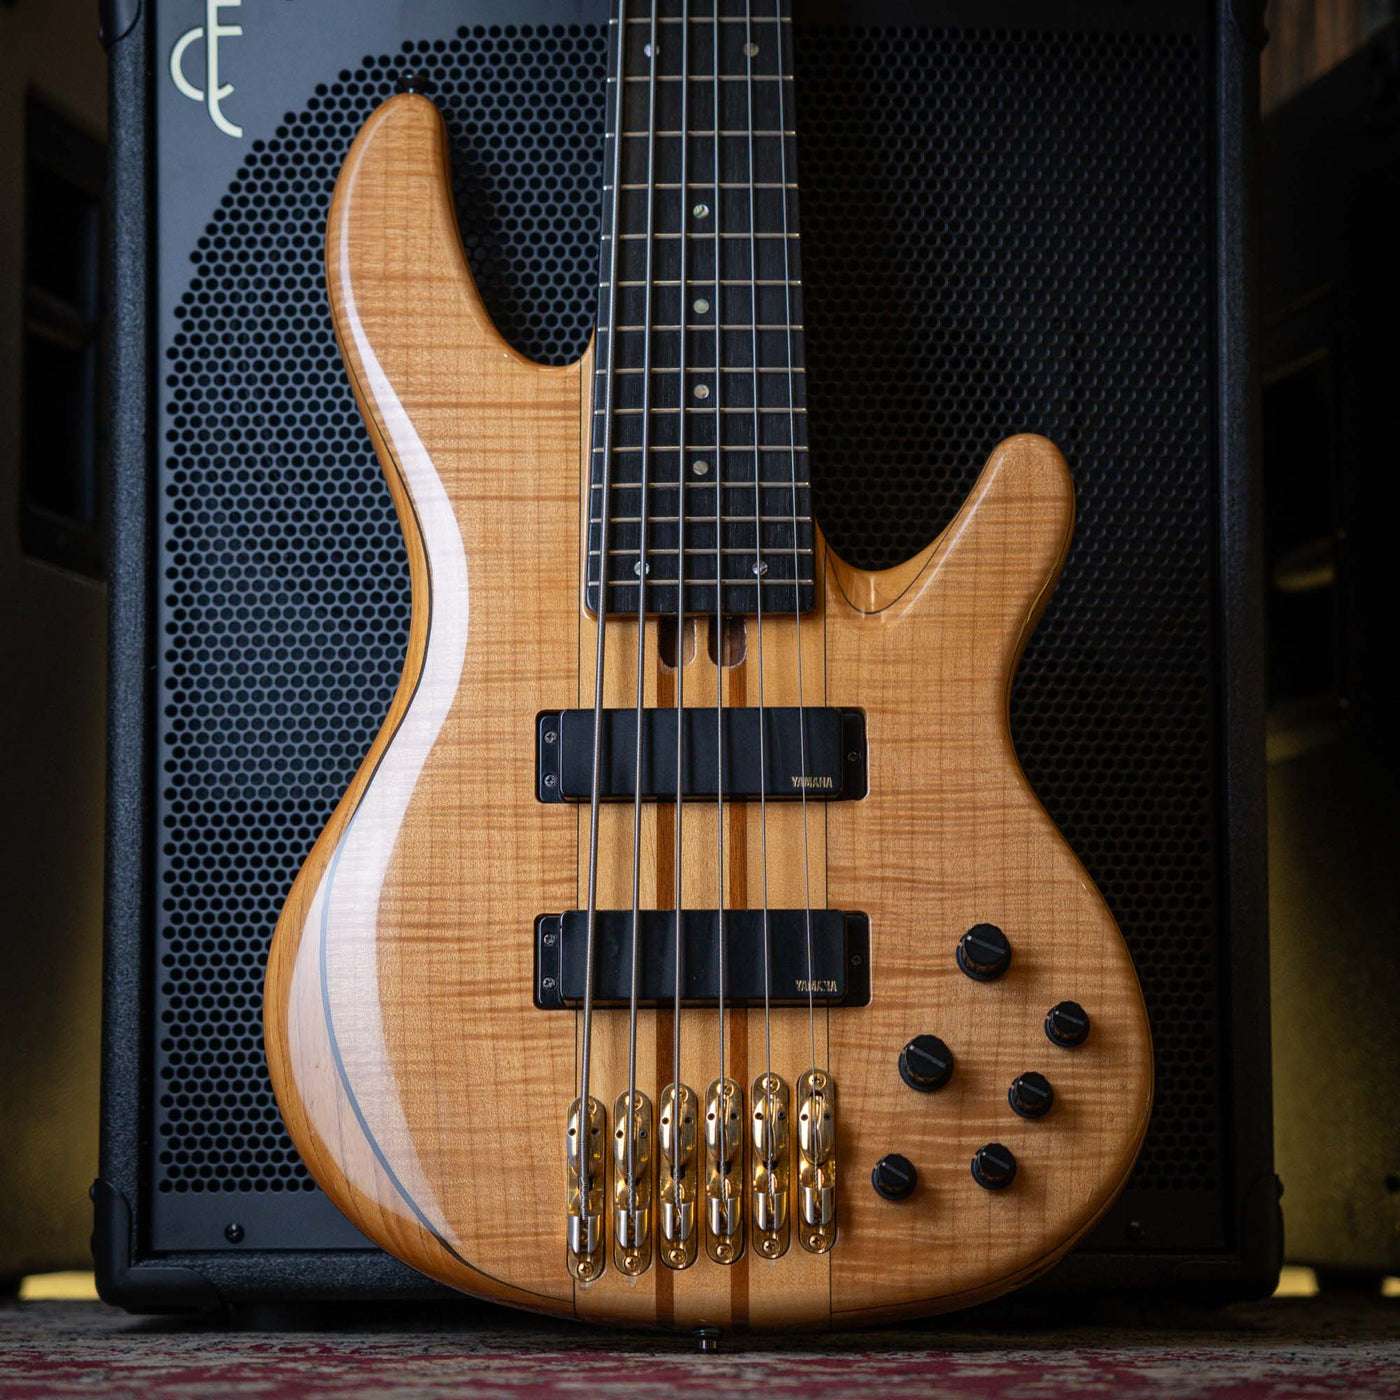 Yamaha TRB-6PII Natural Flamed Maple